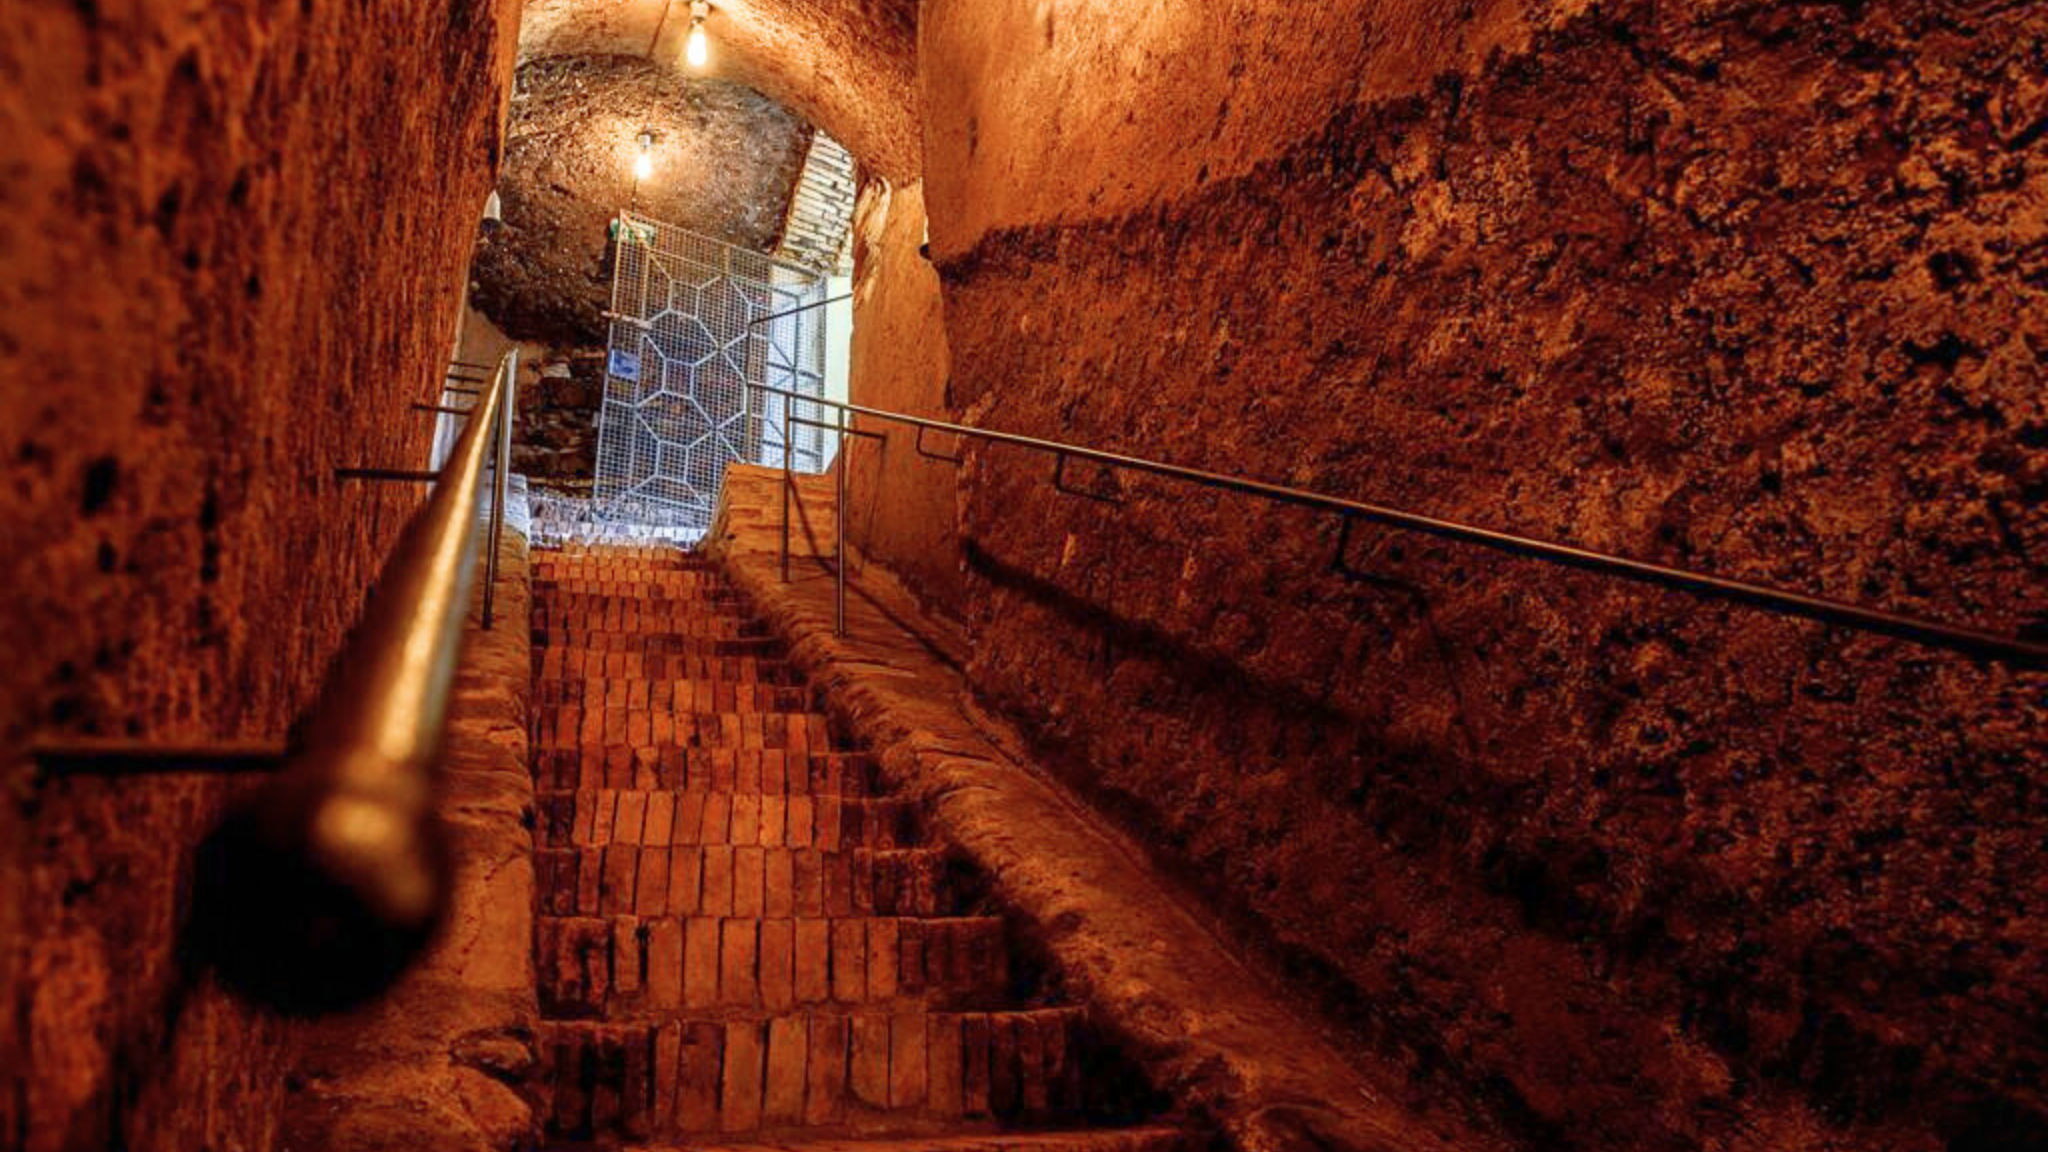 Candlelight Wine Tasting Experience in Ancient Roman Cave in Small Group - Accommodations in Rome